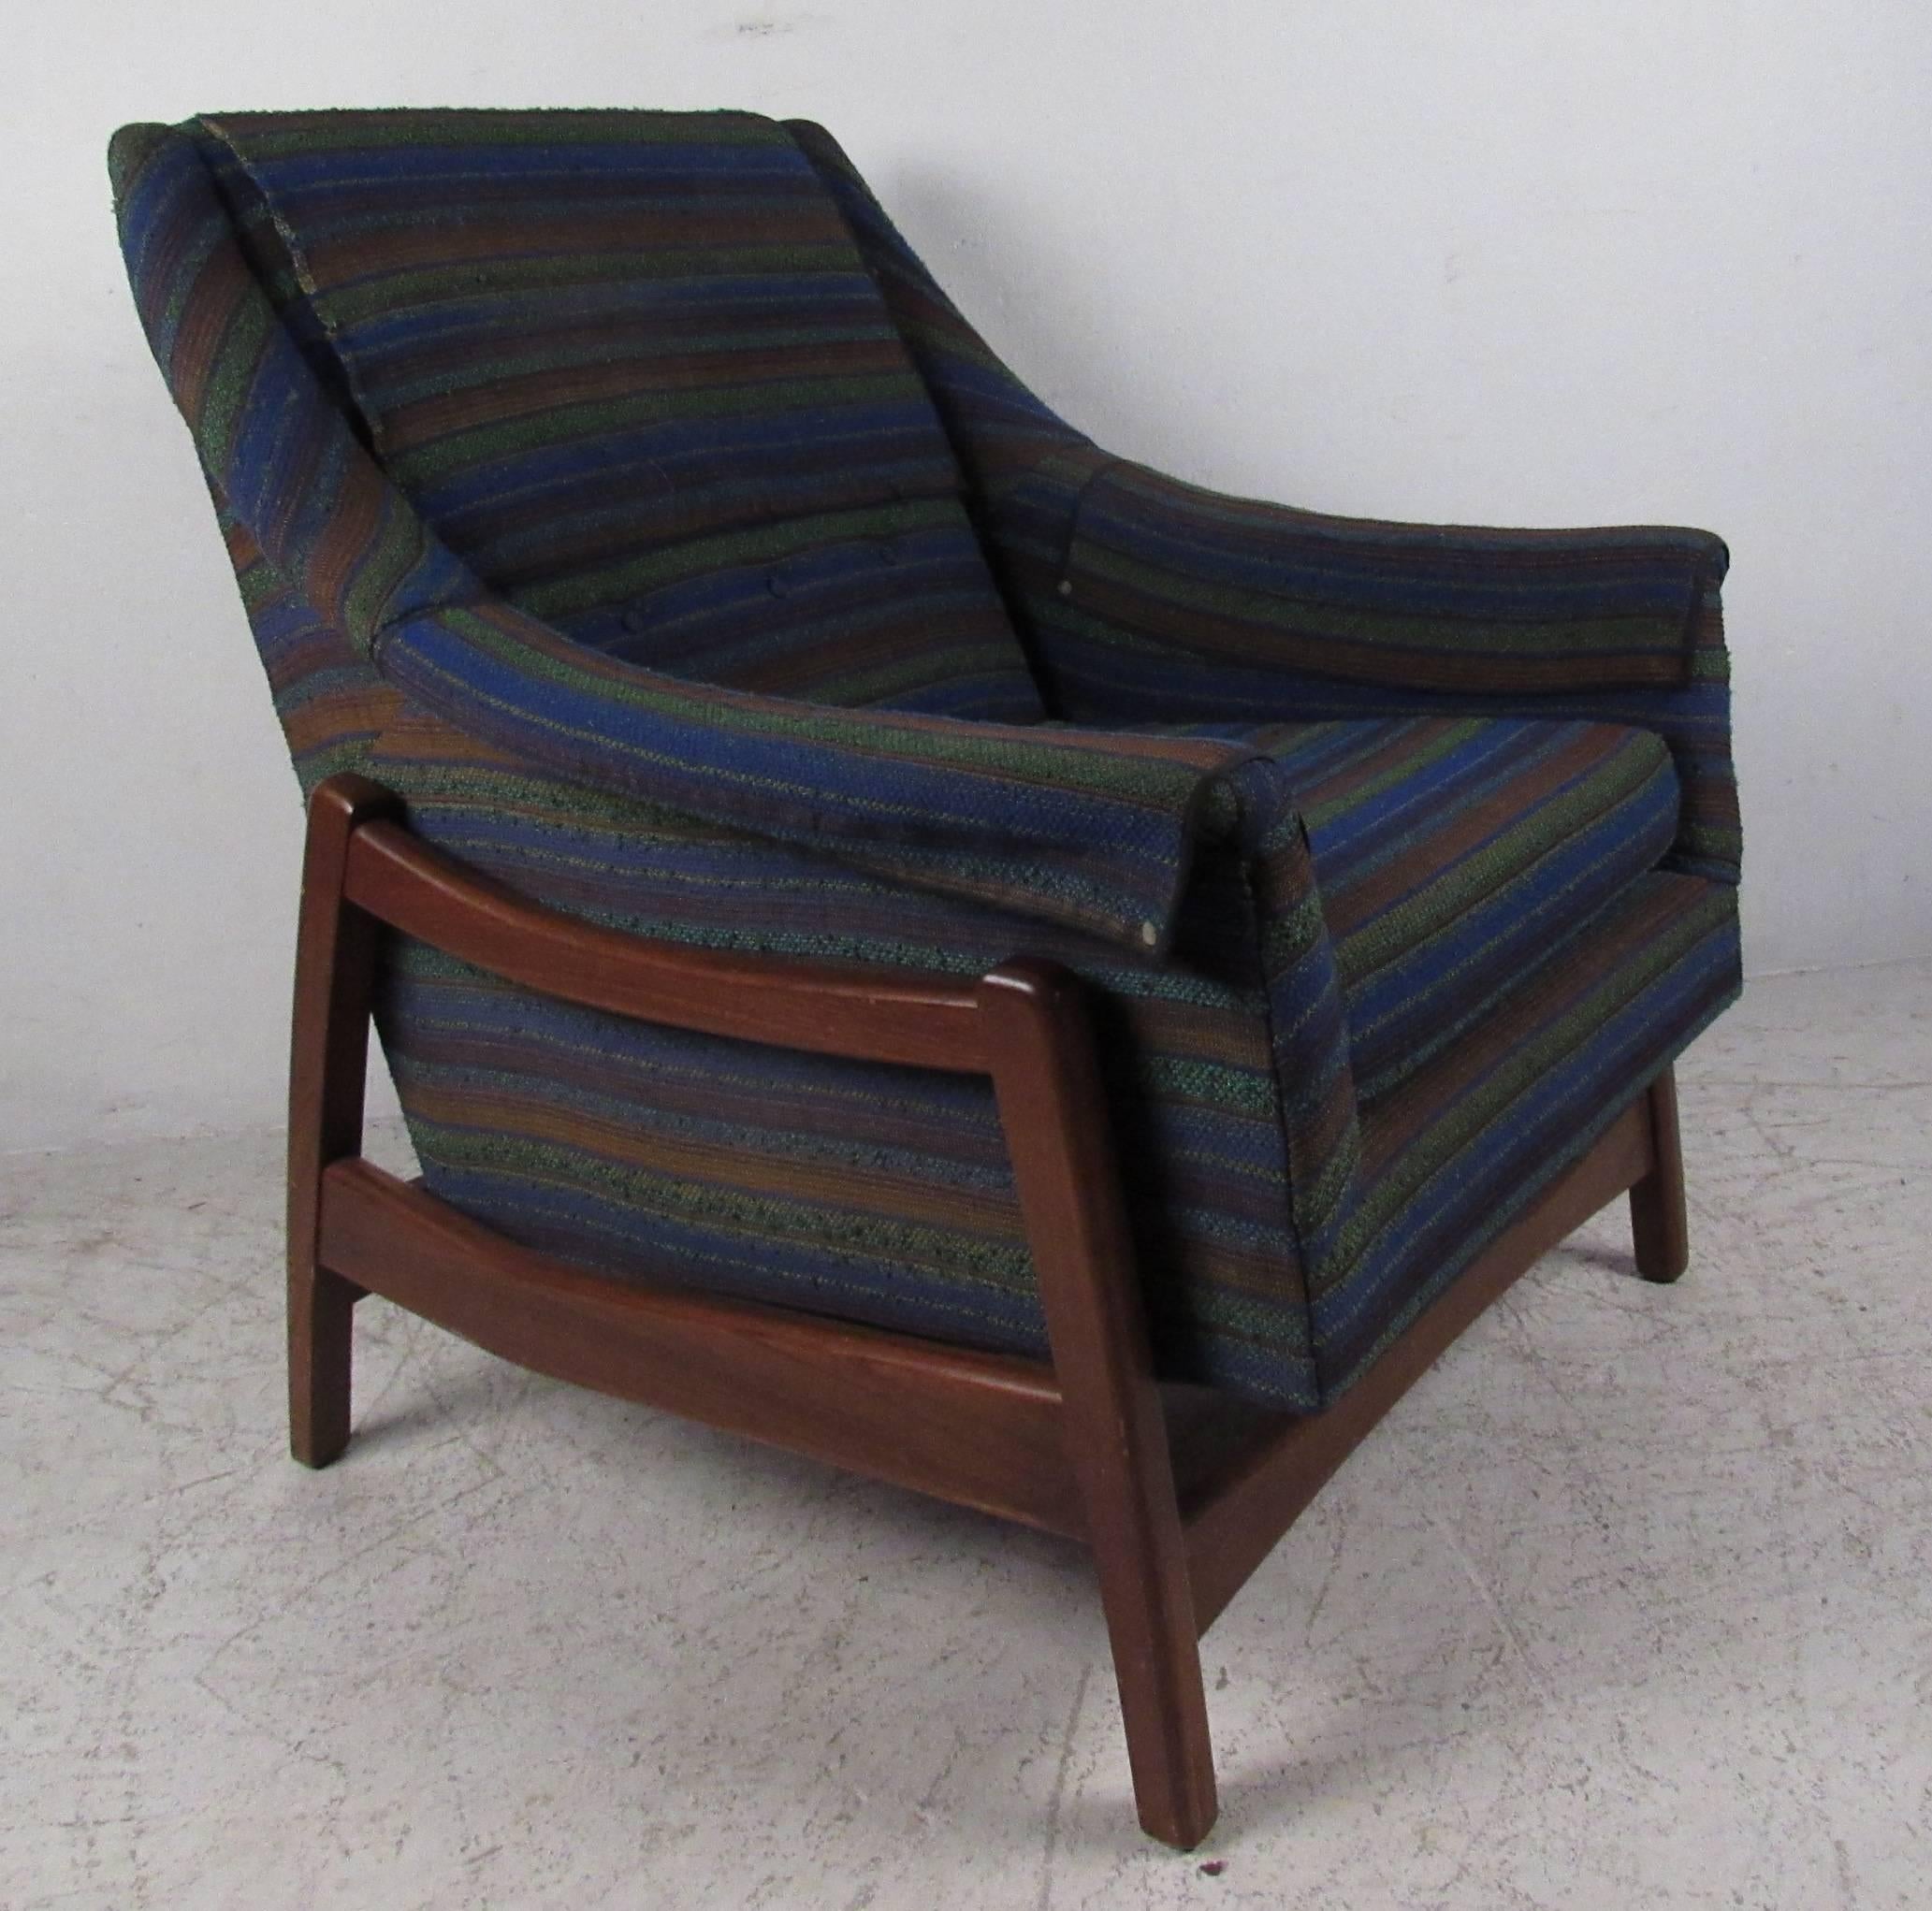 Stylish & comfortable mid century rocking chair with ottoman by quality American manufacturer Paoli Chair Company.  Please confirm item location (NY or NJ) with dealer.